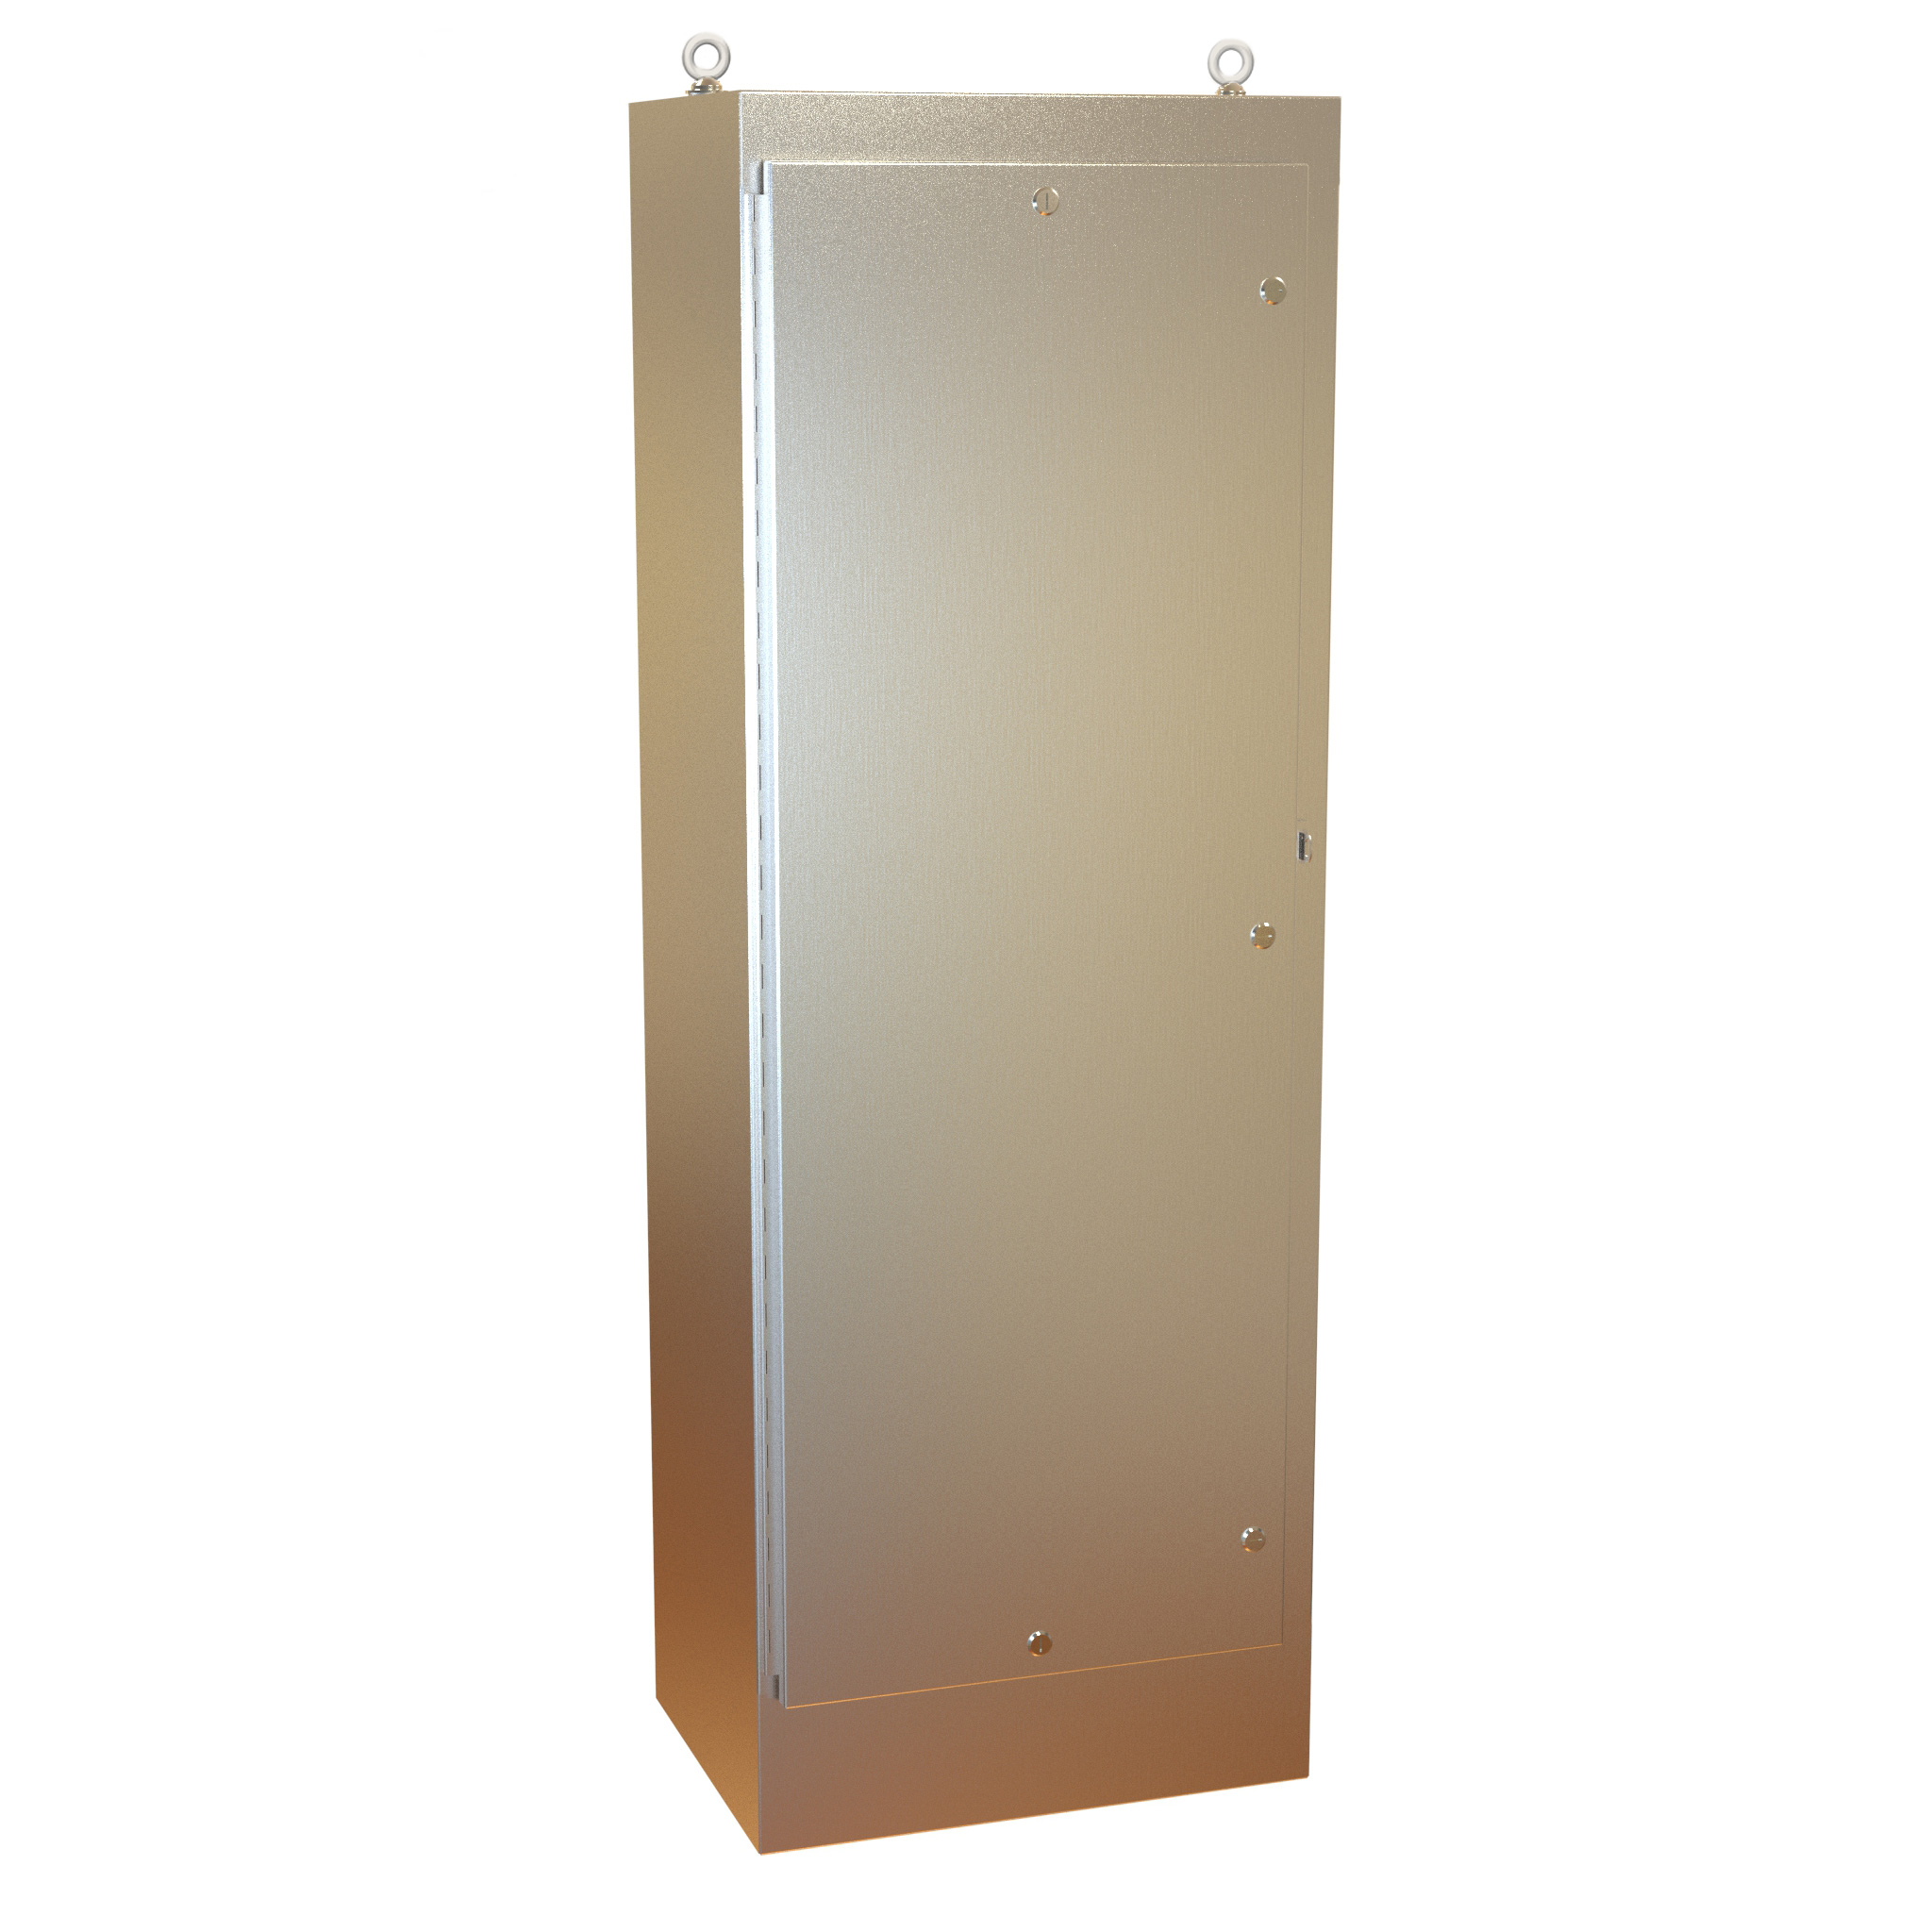 Type 4X Stainless Steel Freestanding Enclosure 1418 N4 FS QT SS Series